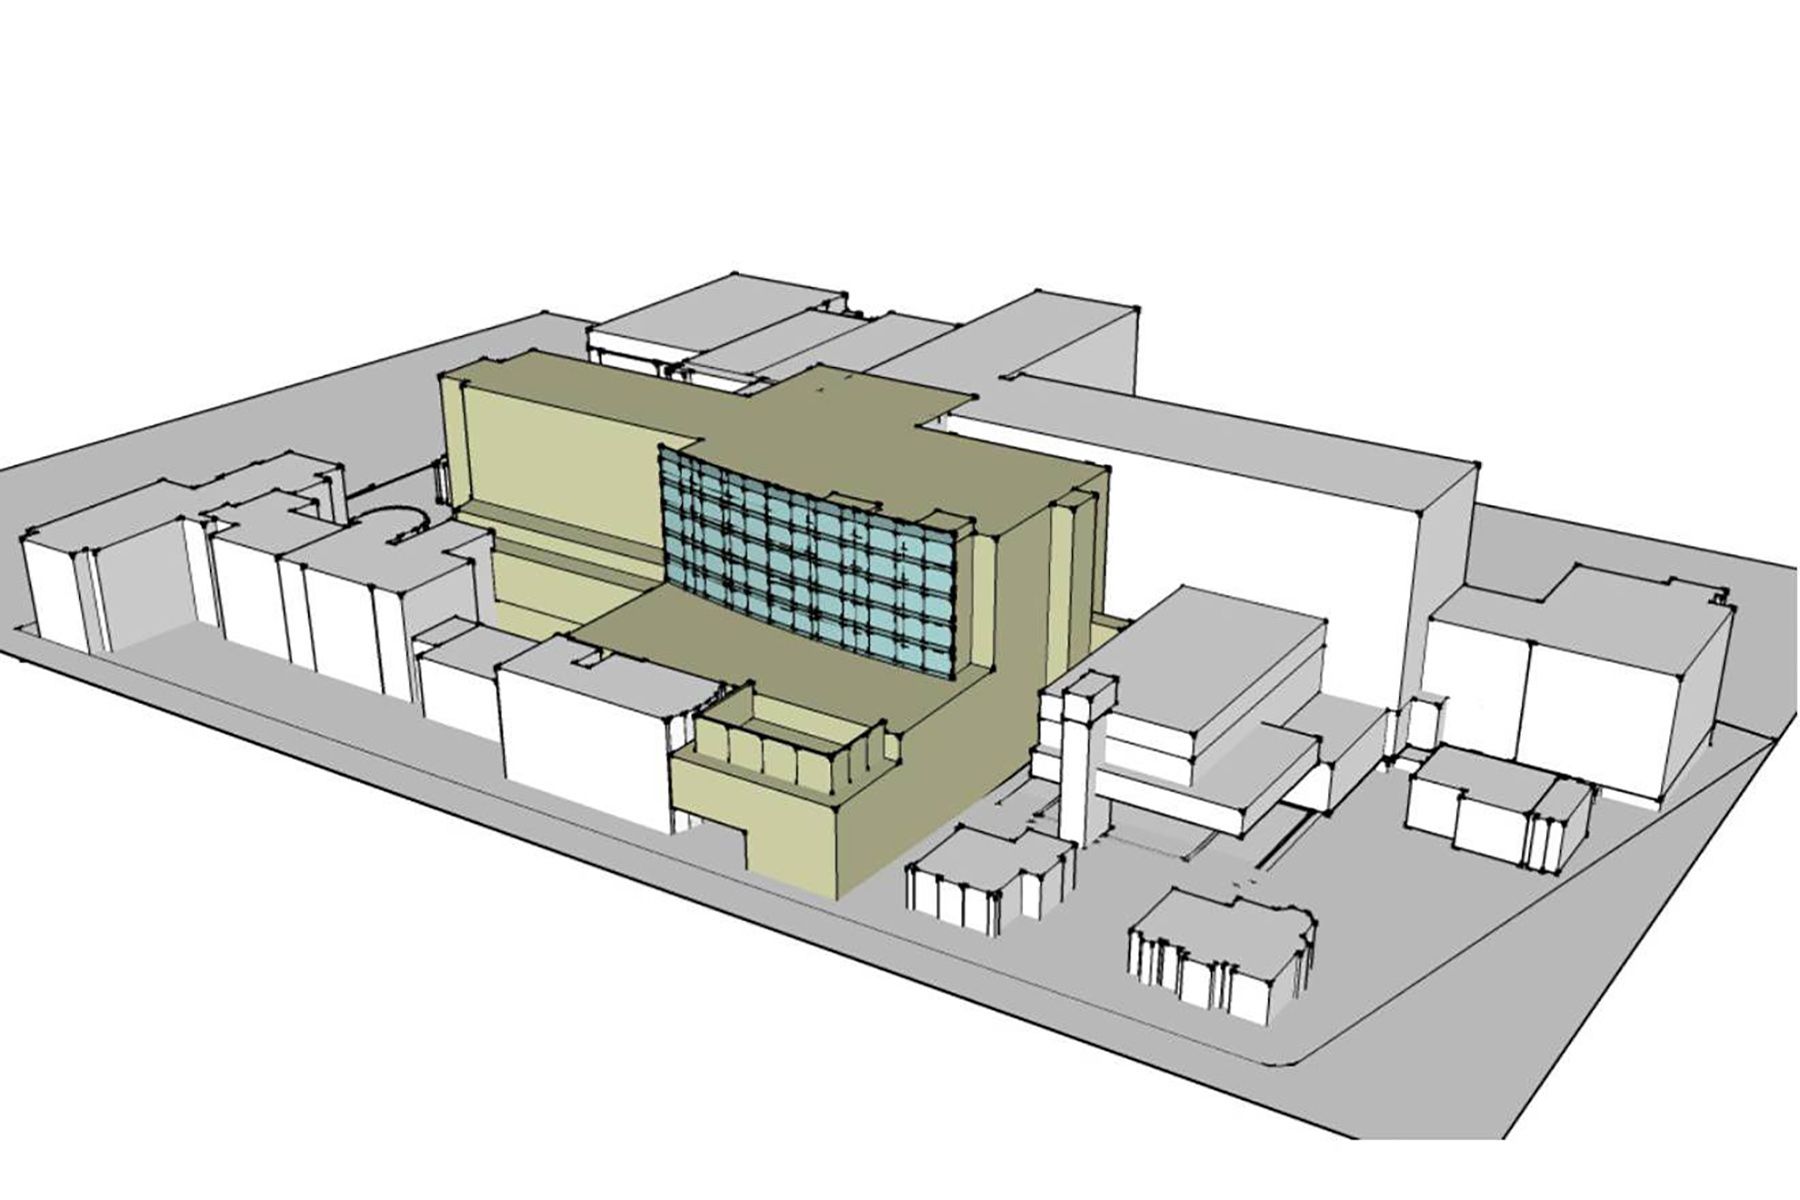 The new facility (in green) will include new Operating Rooms, Emergency Department, Neonatal Intensive Care Unit and more.